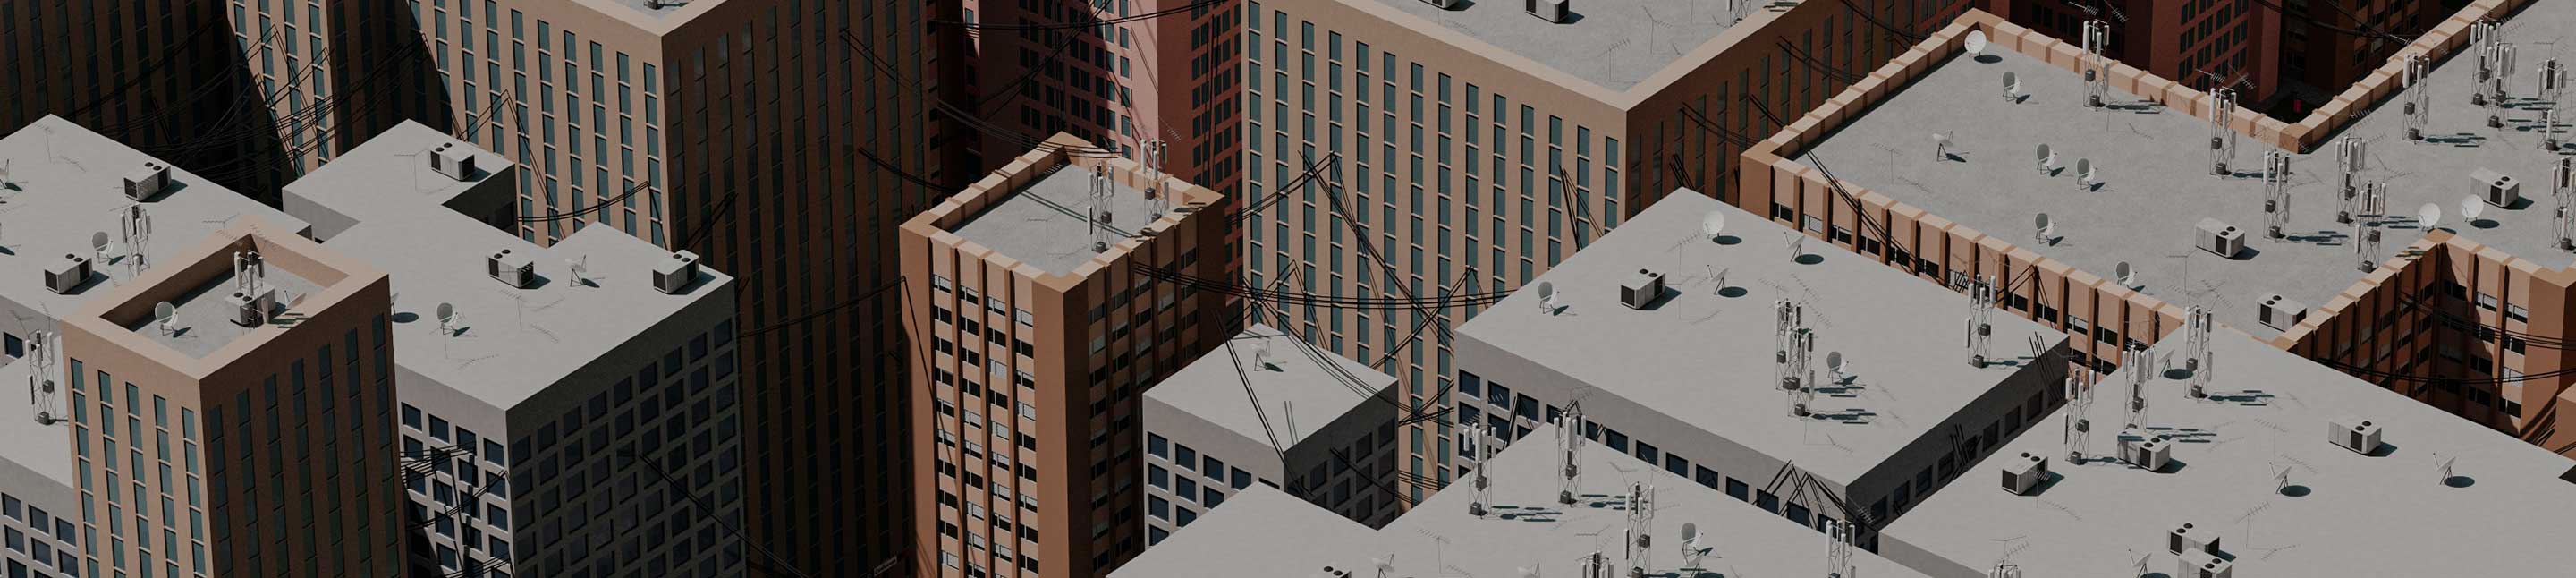 Background image of buildings